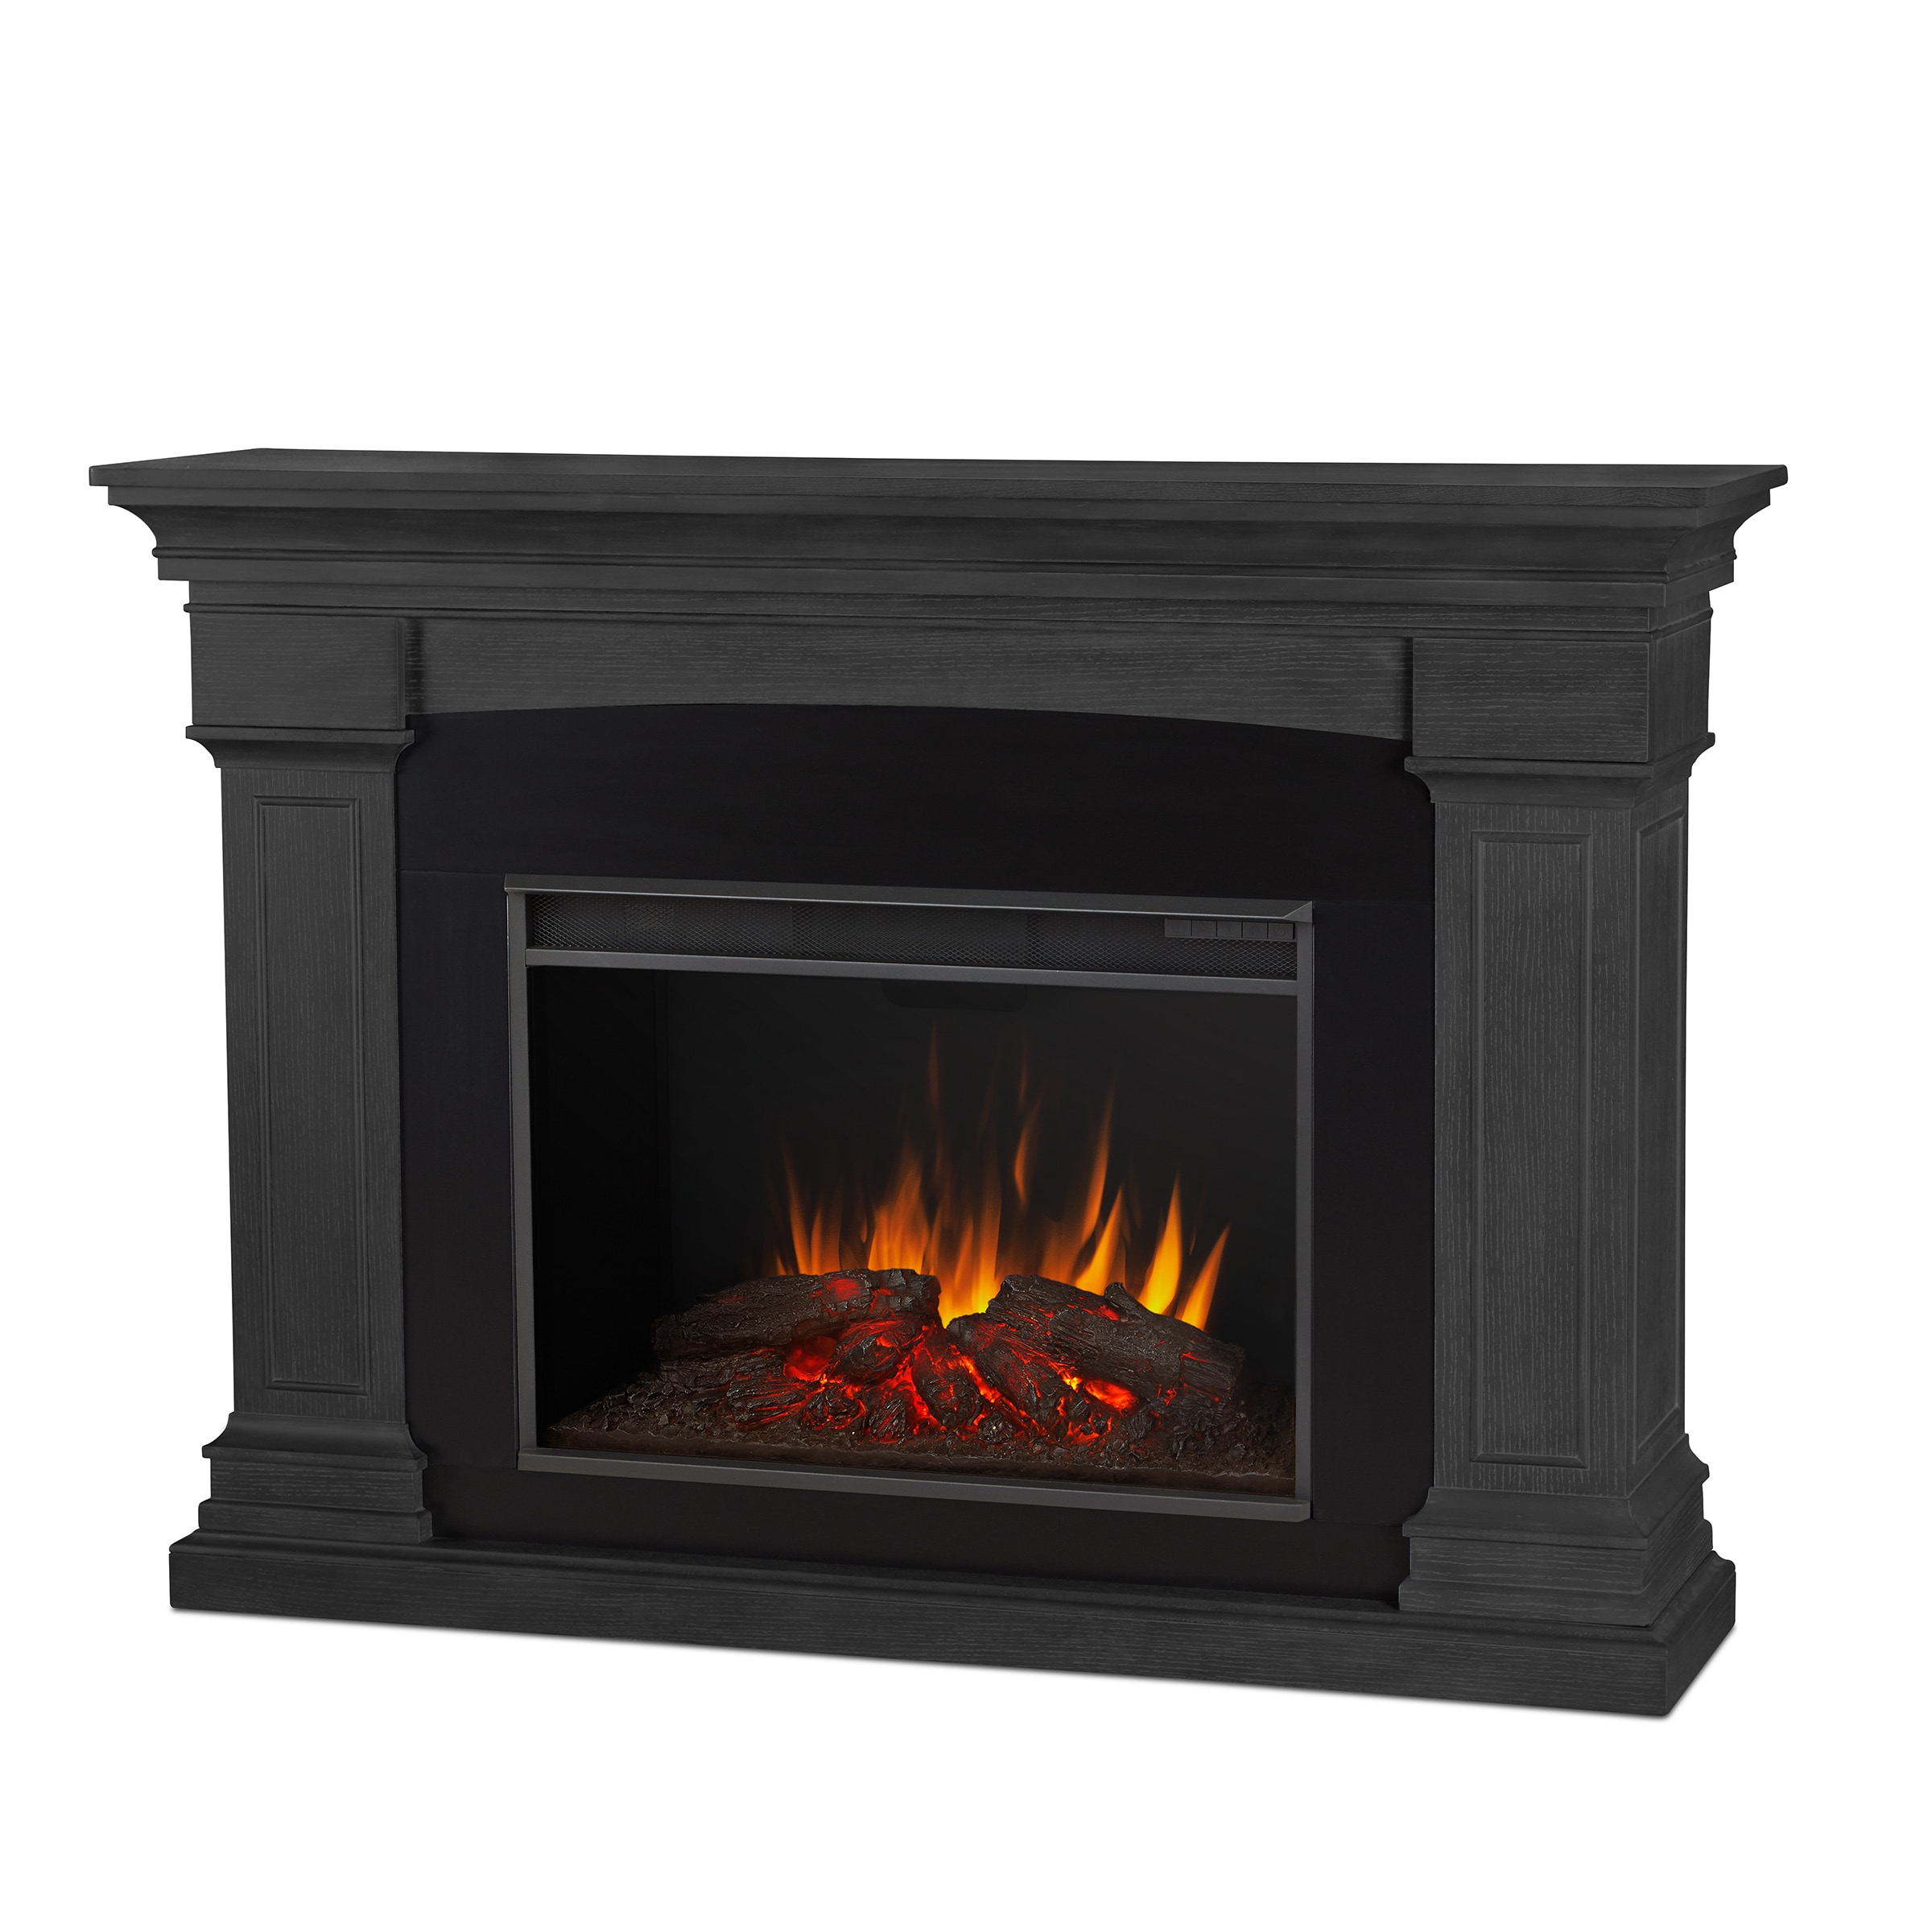 Real Flame 63-in W Gray Fan-forced Electric Fireplace at Lowes.com